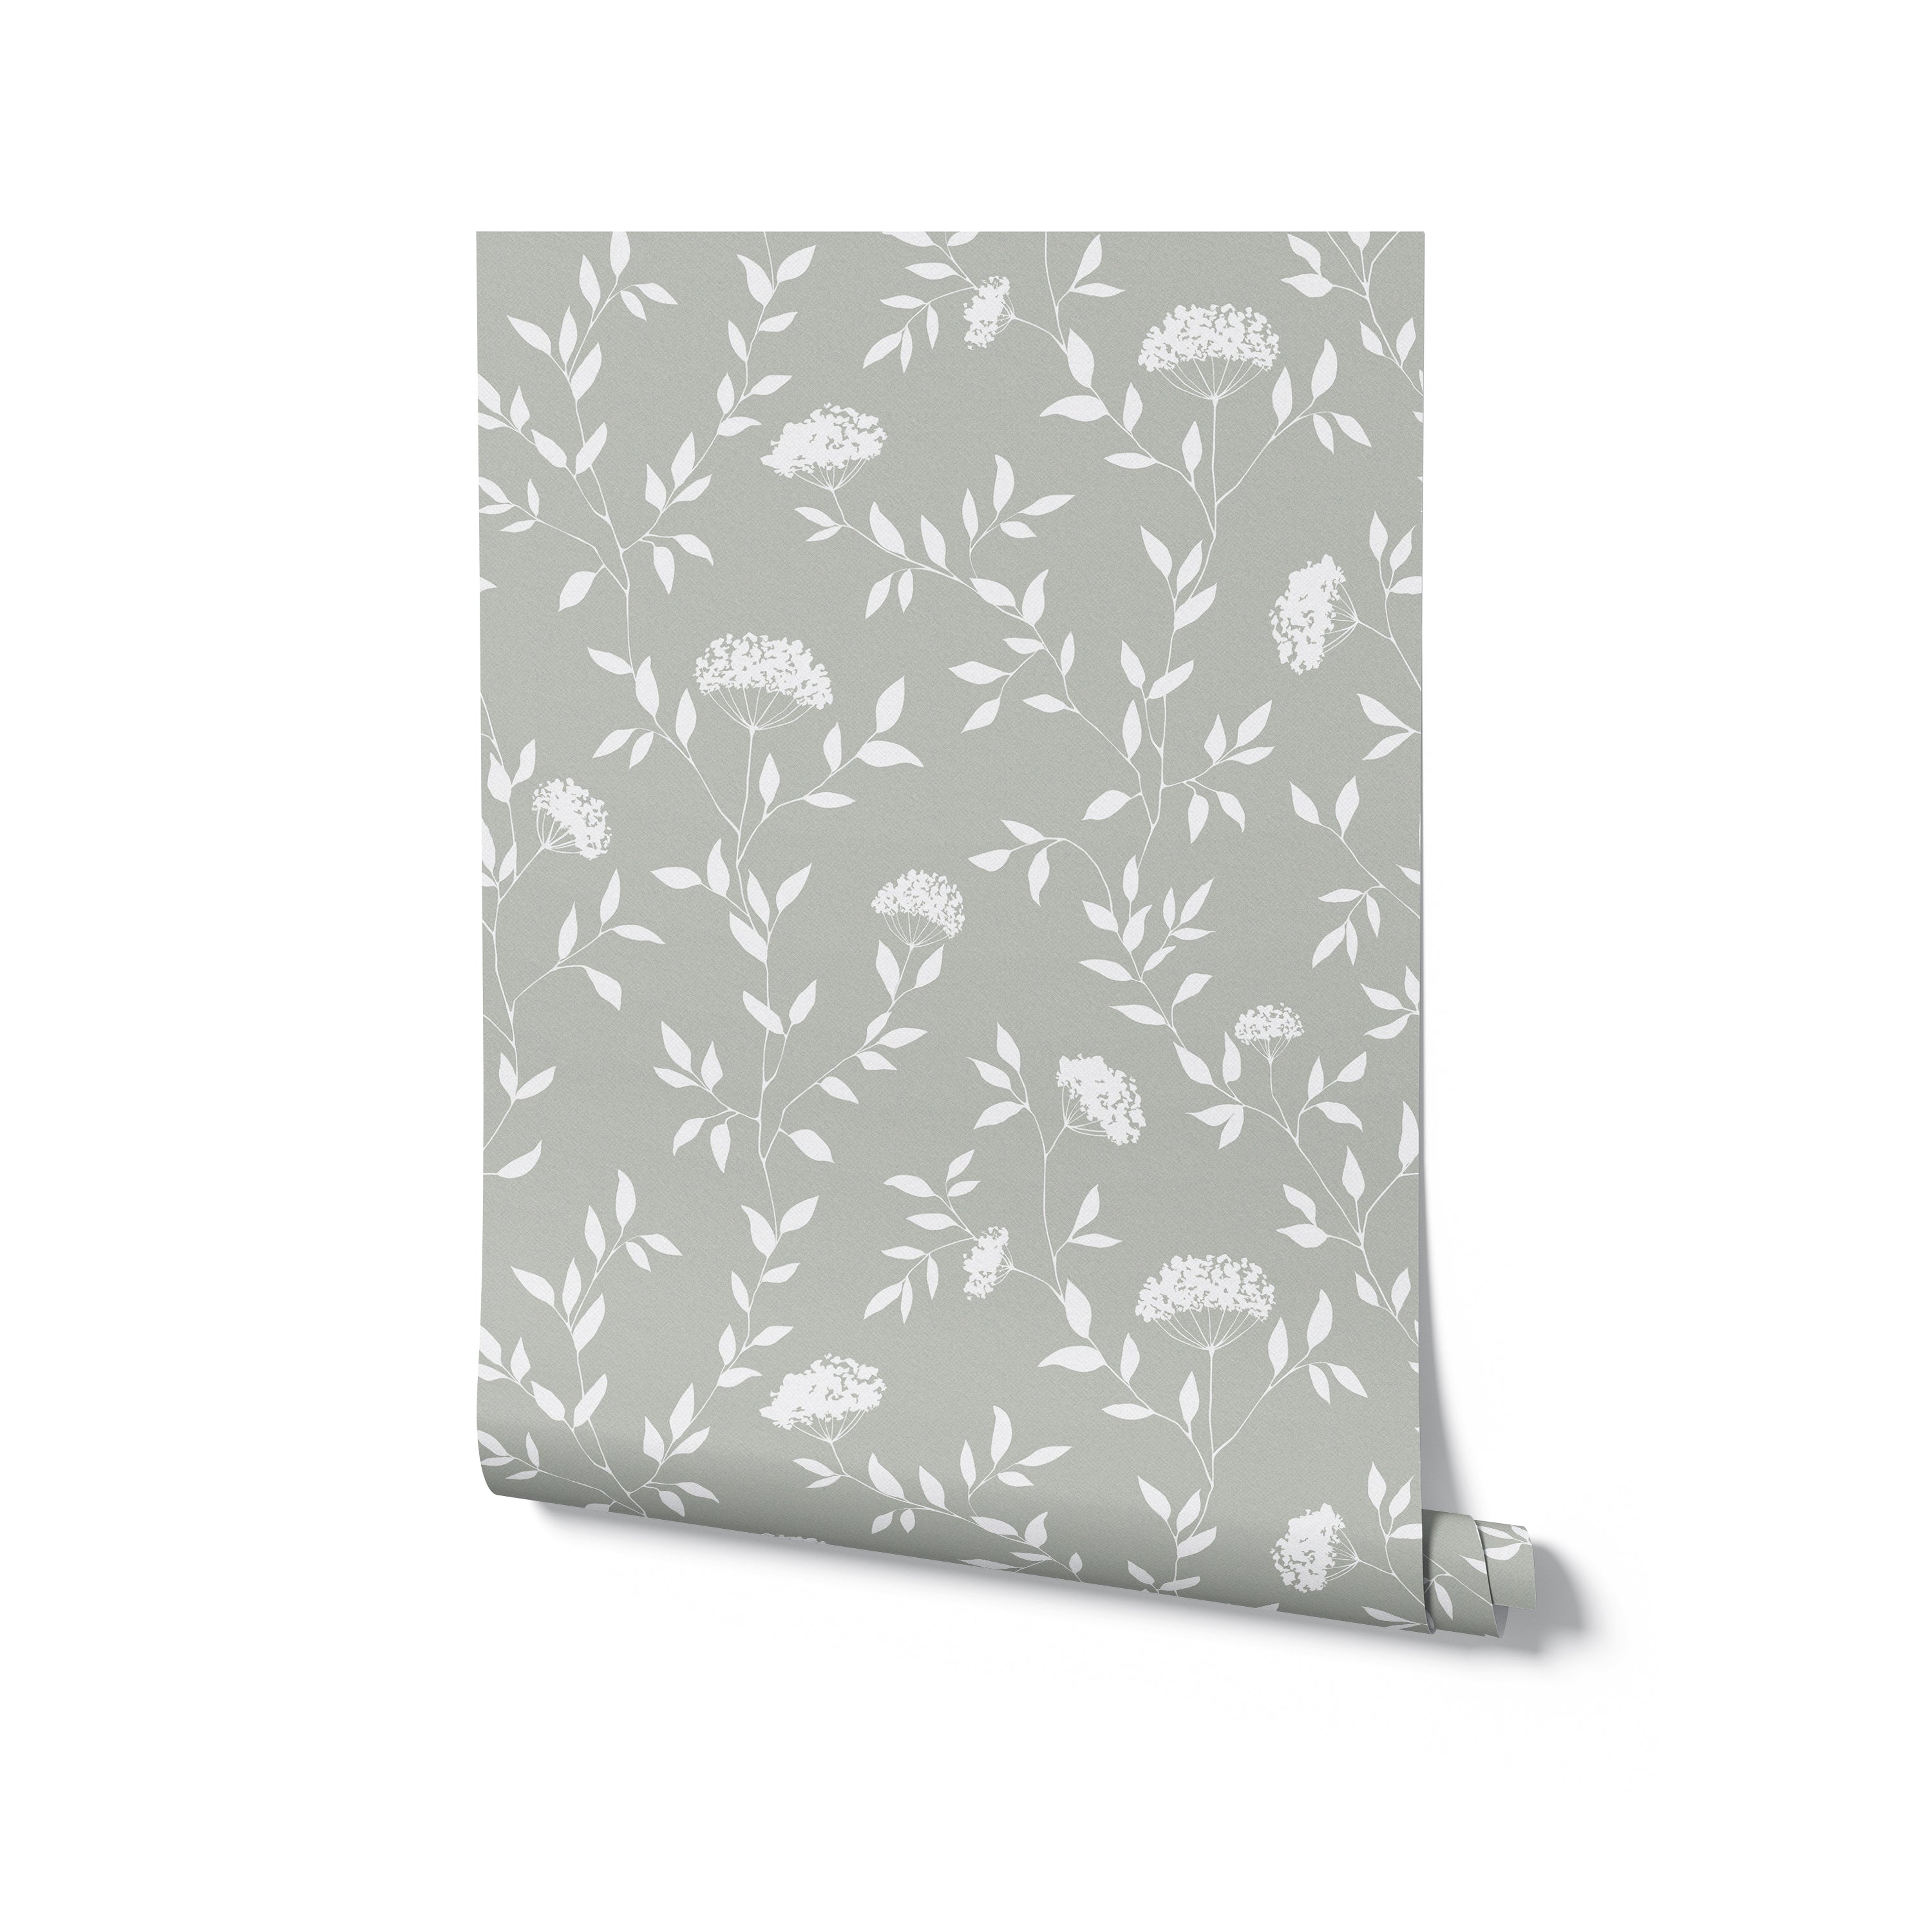 This image depicts a roll of the Botanical Elegance Wallpaper-Olive standing against a white background. The roll is partially unrolled, revealing the wallpaper's olive base and white botanical print. The design is consistent throughout, with a pattern of branches and floral motifs that suggests a tranquil natural setting. This image gives an idea of the wallpaper's texture and quality, as well as how it might look before installation.